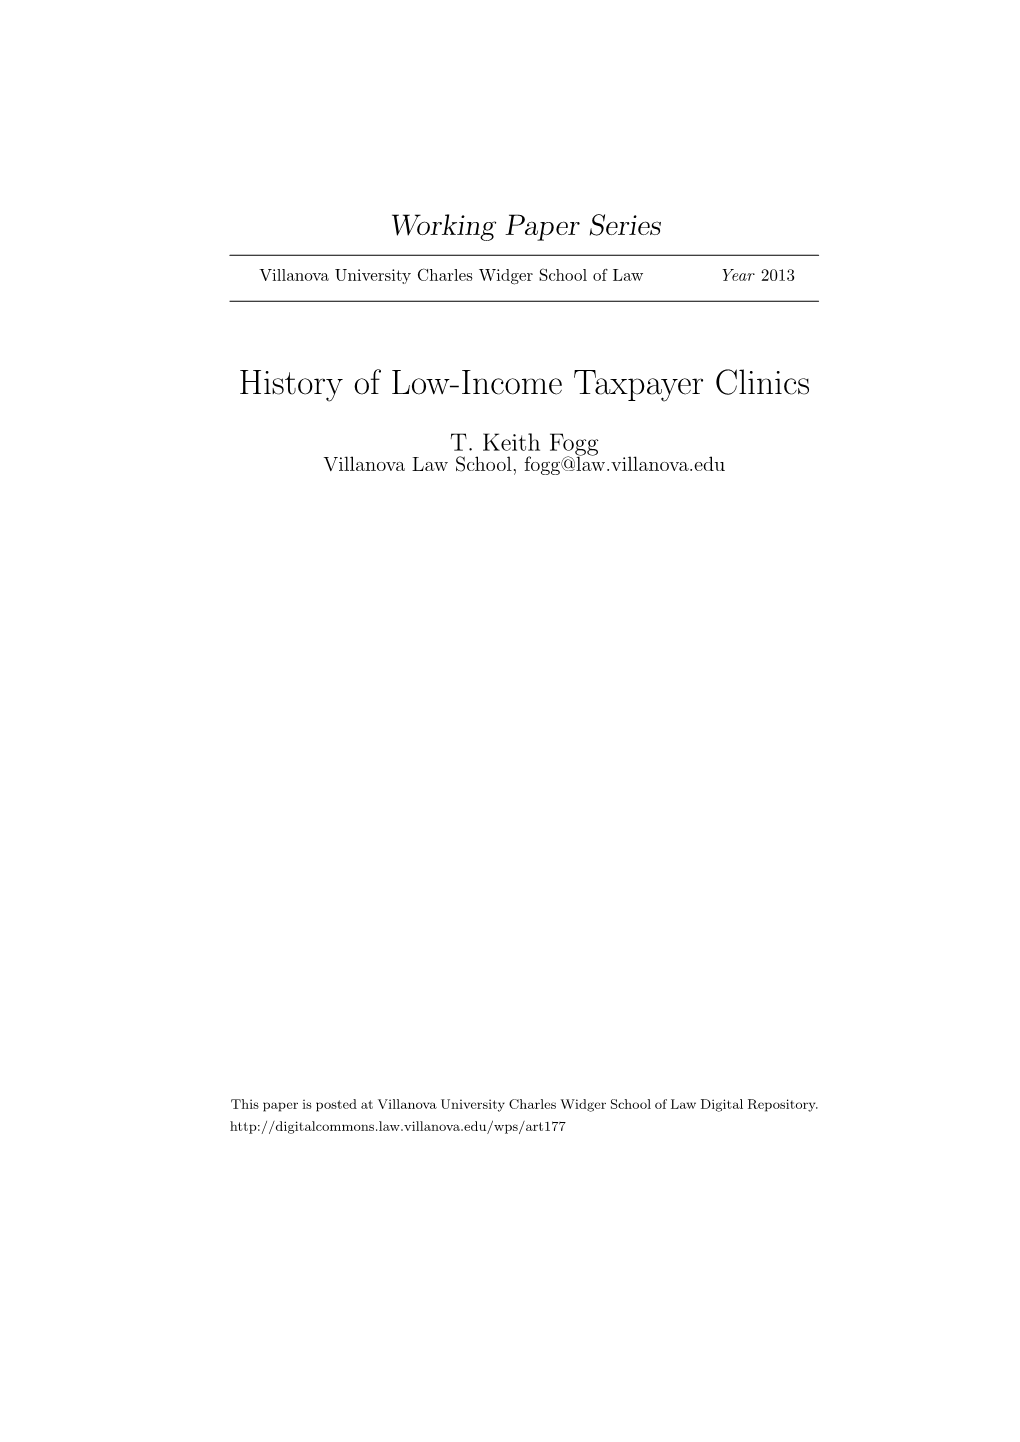 History of Low-Income Taxpayer Clinics